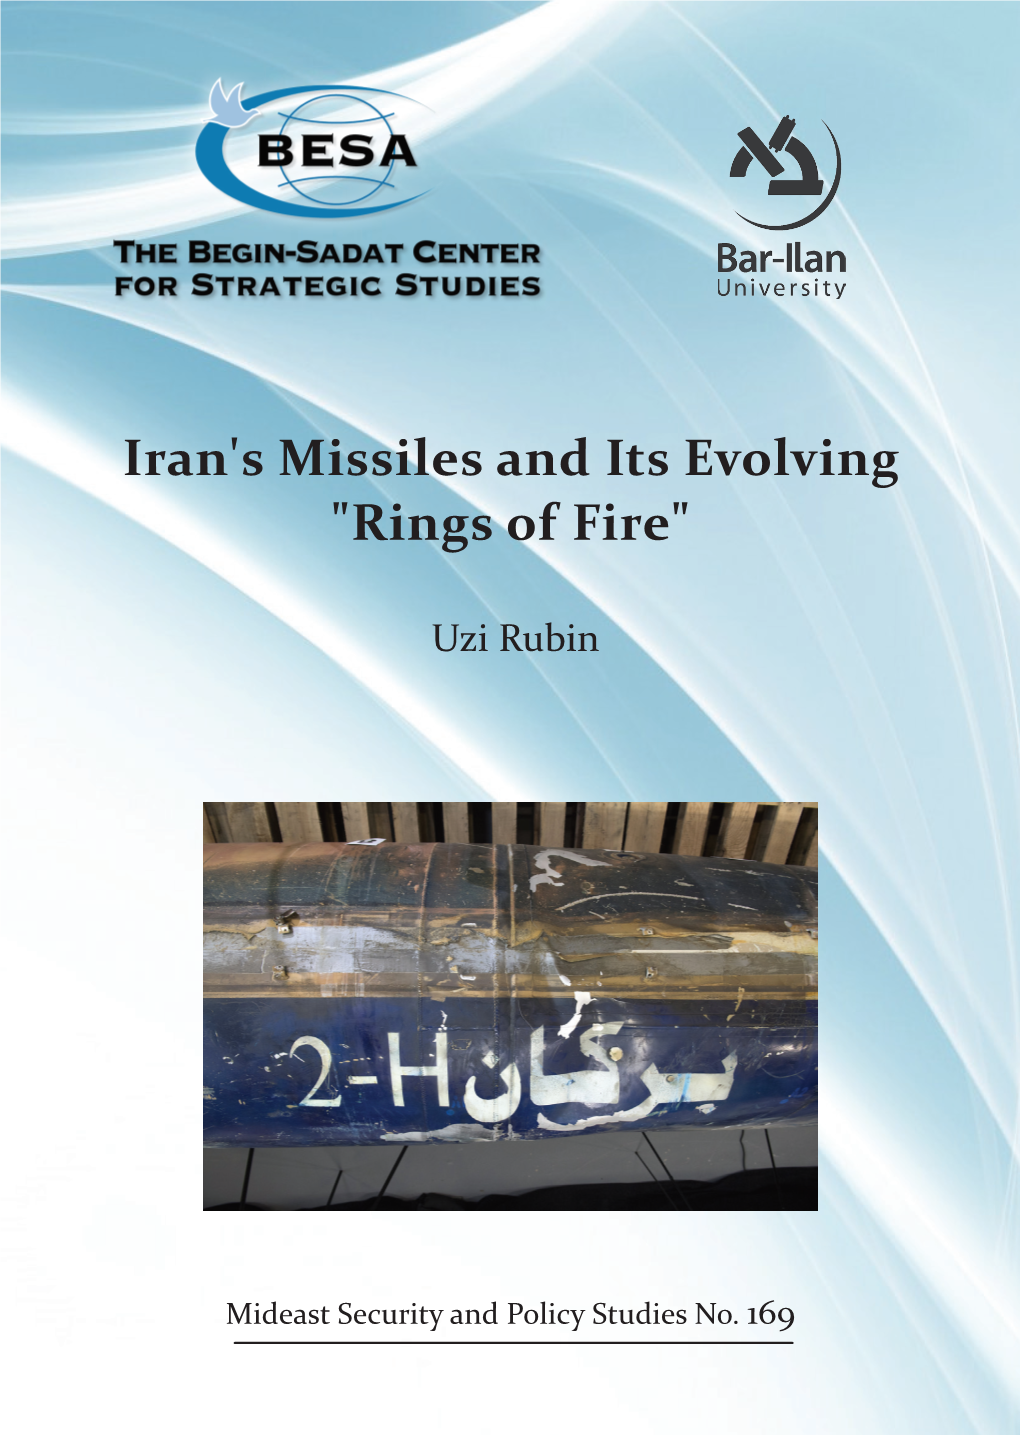 Iran's Missiles and Its Evolving "Rings of Fire"